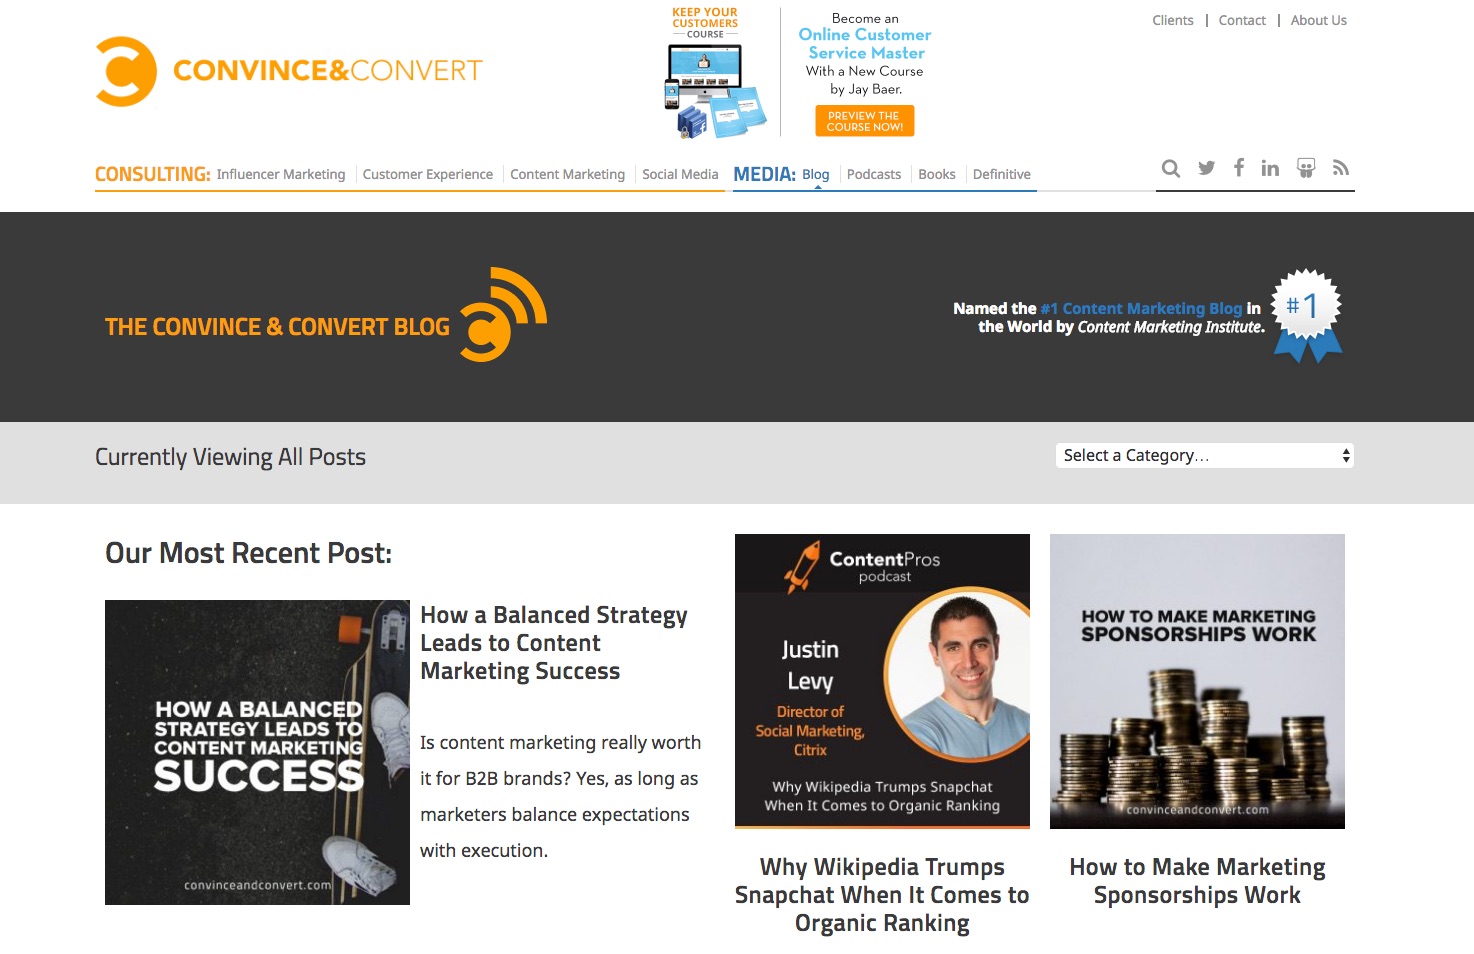 blog___convince_and_convert__social_media_consulting_and_content_marketing_consulting